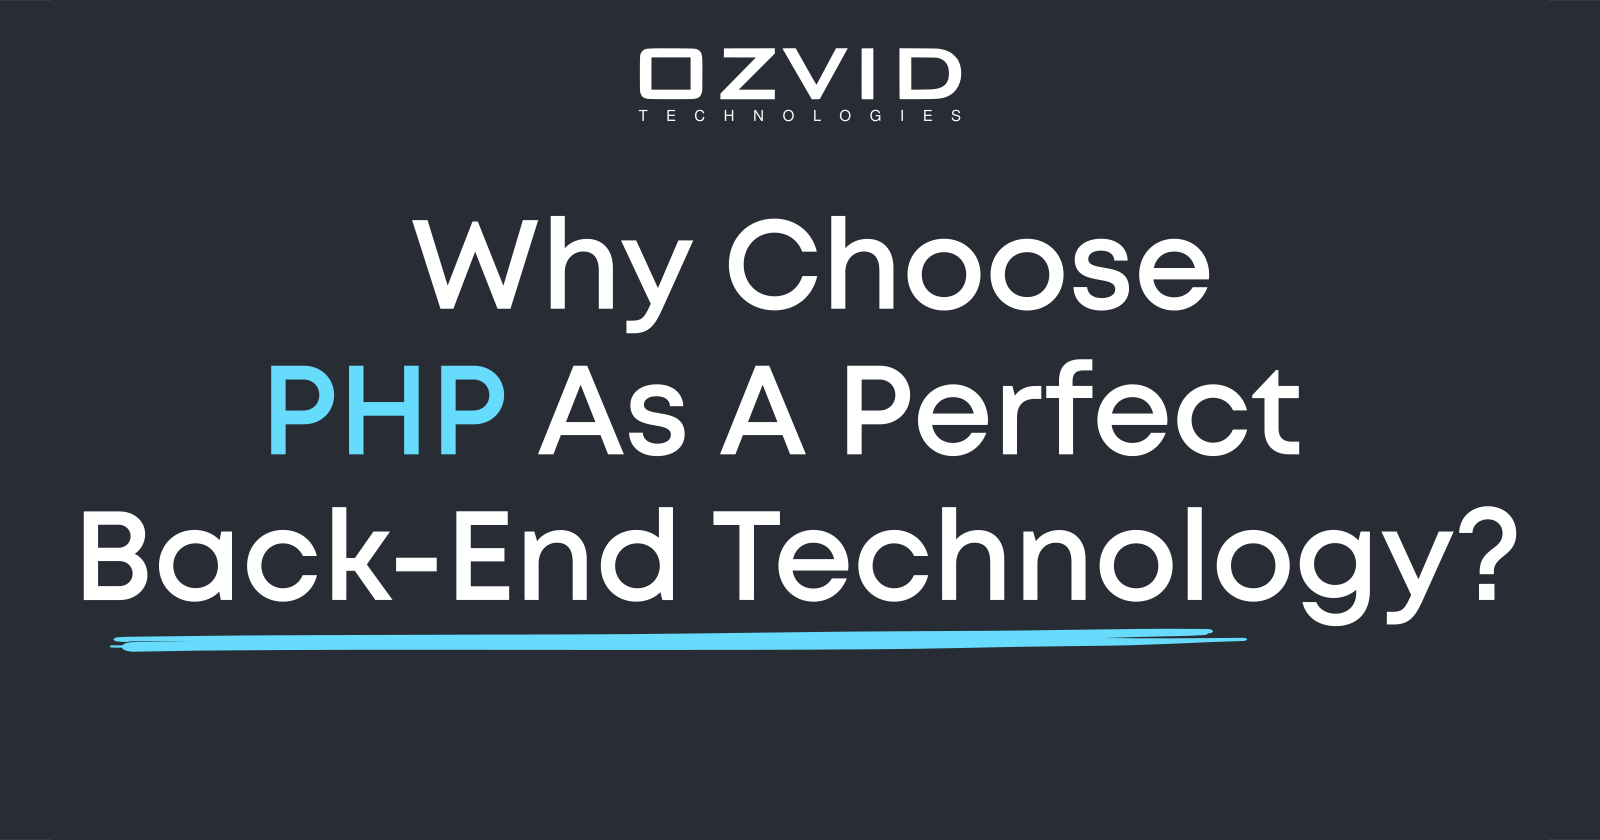 Why choose PHP as a Perfect Back-End Technology?